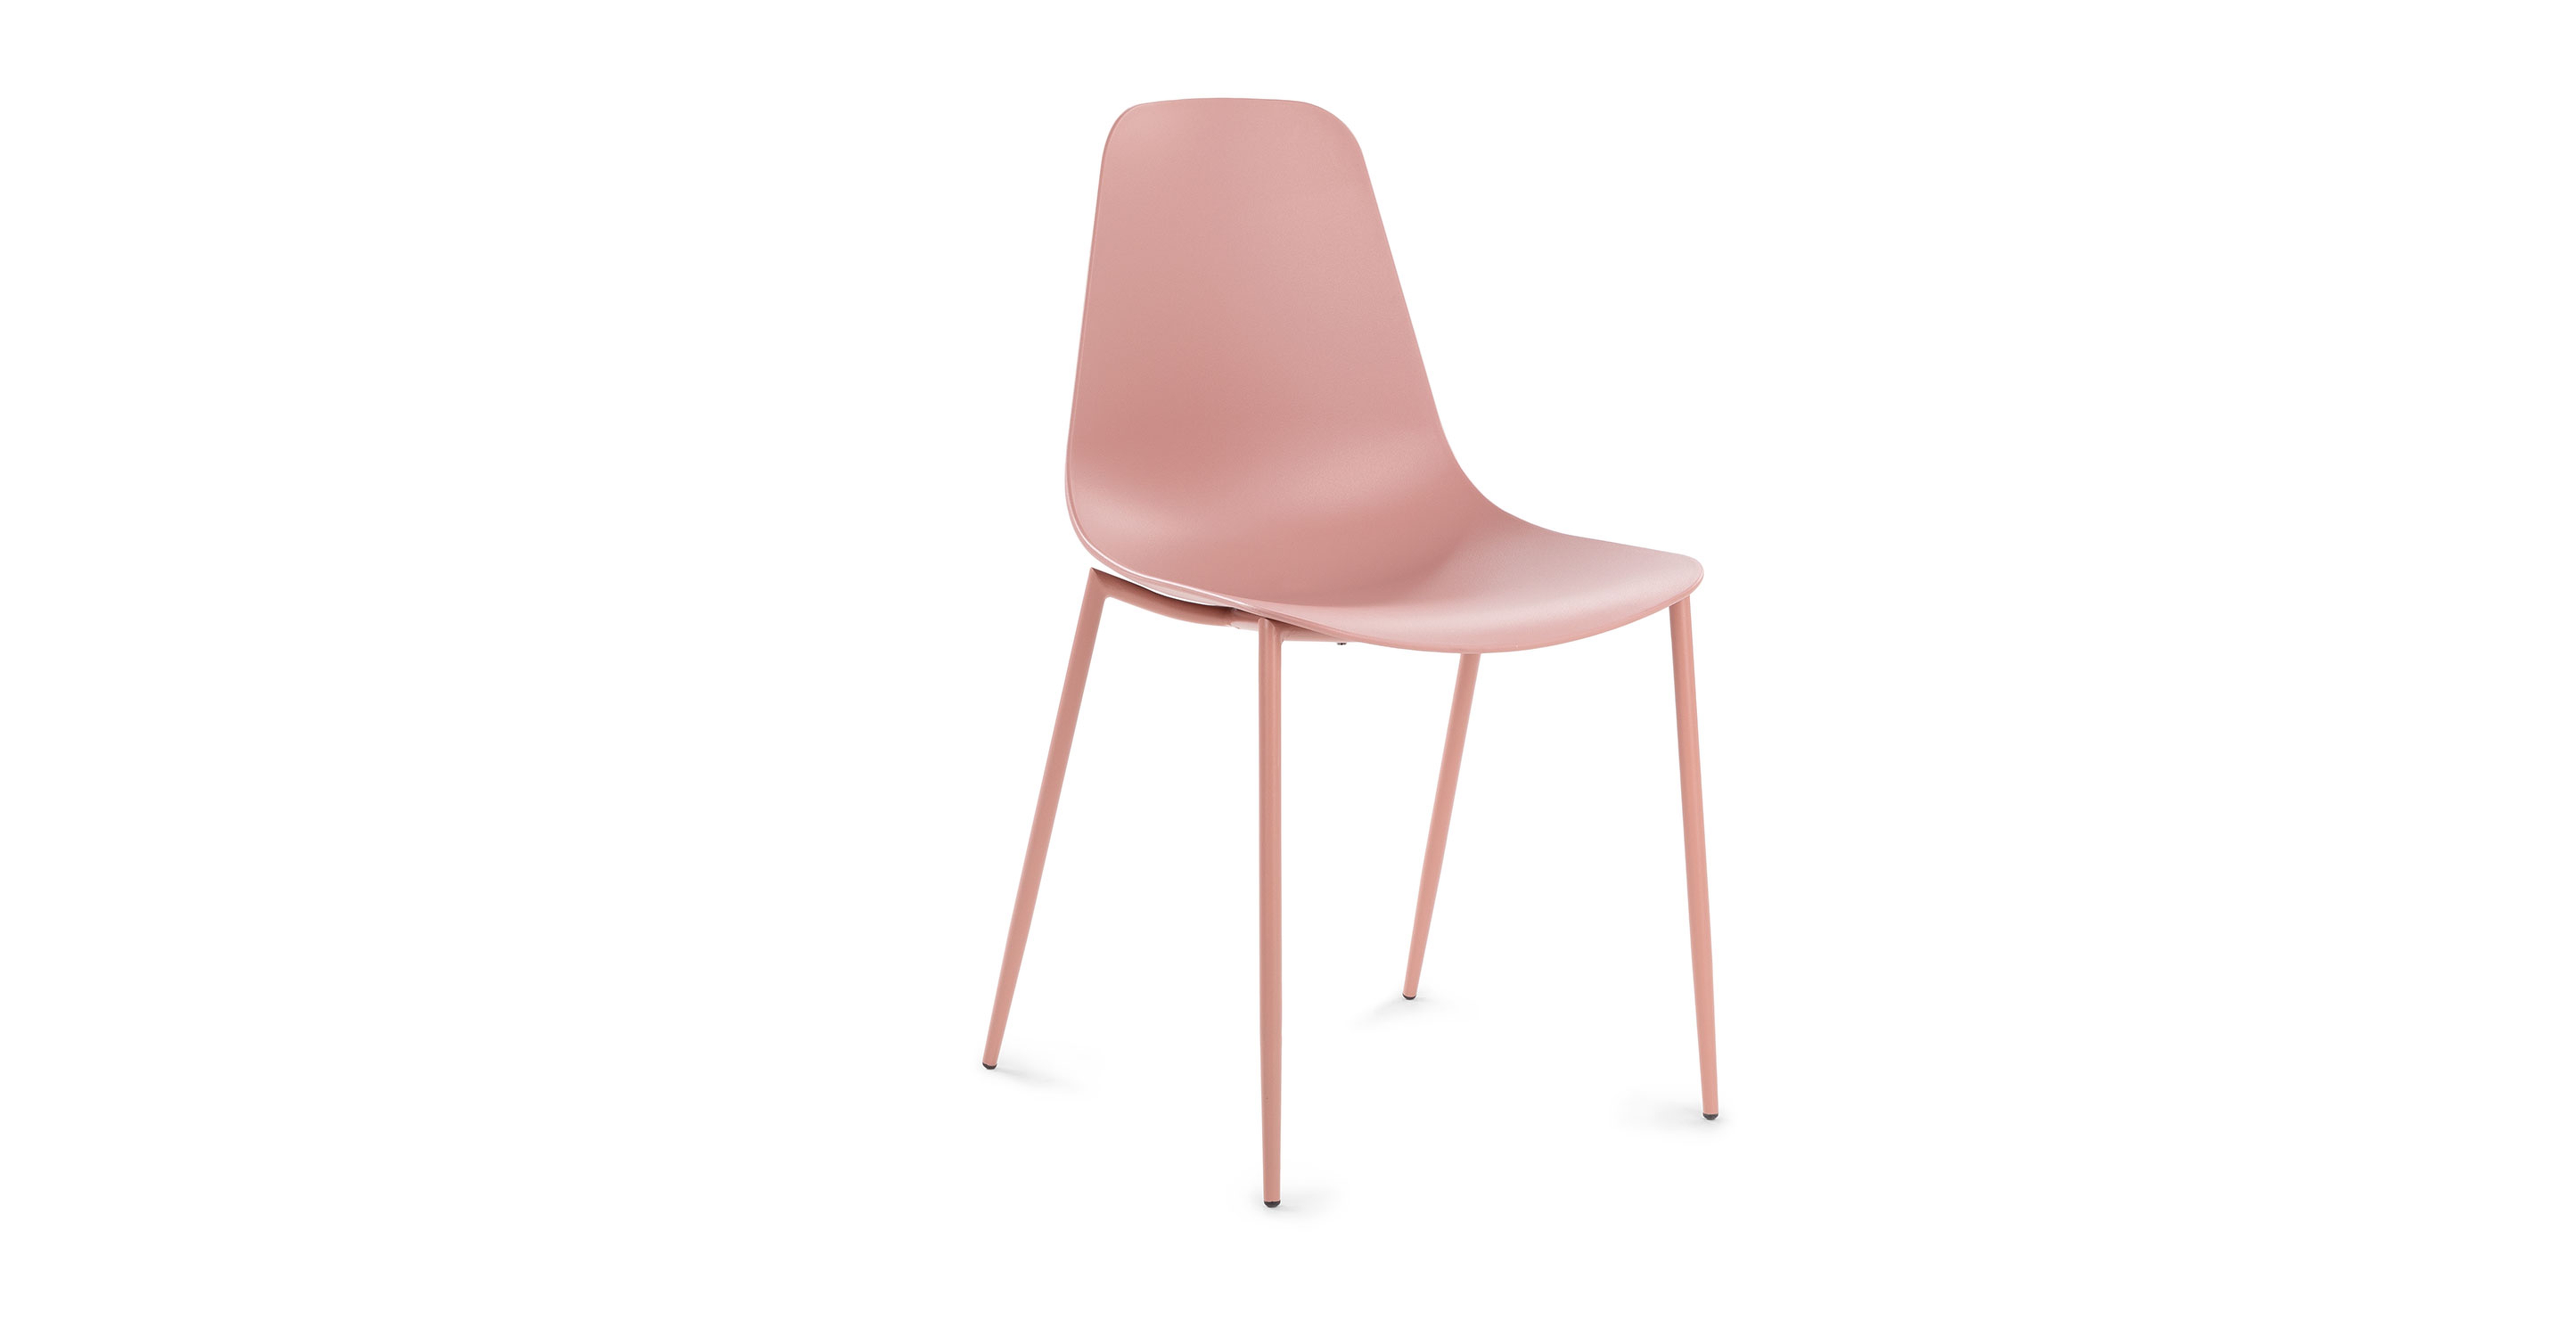 Svelti Dusty Pink Dining Chair - Article